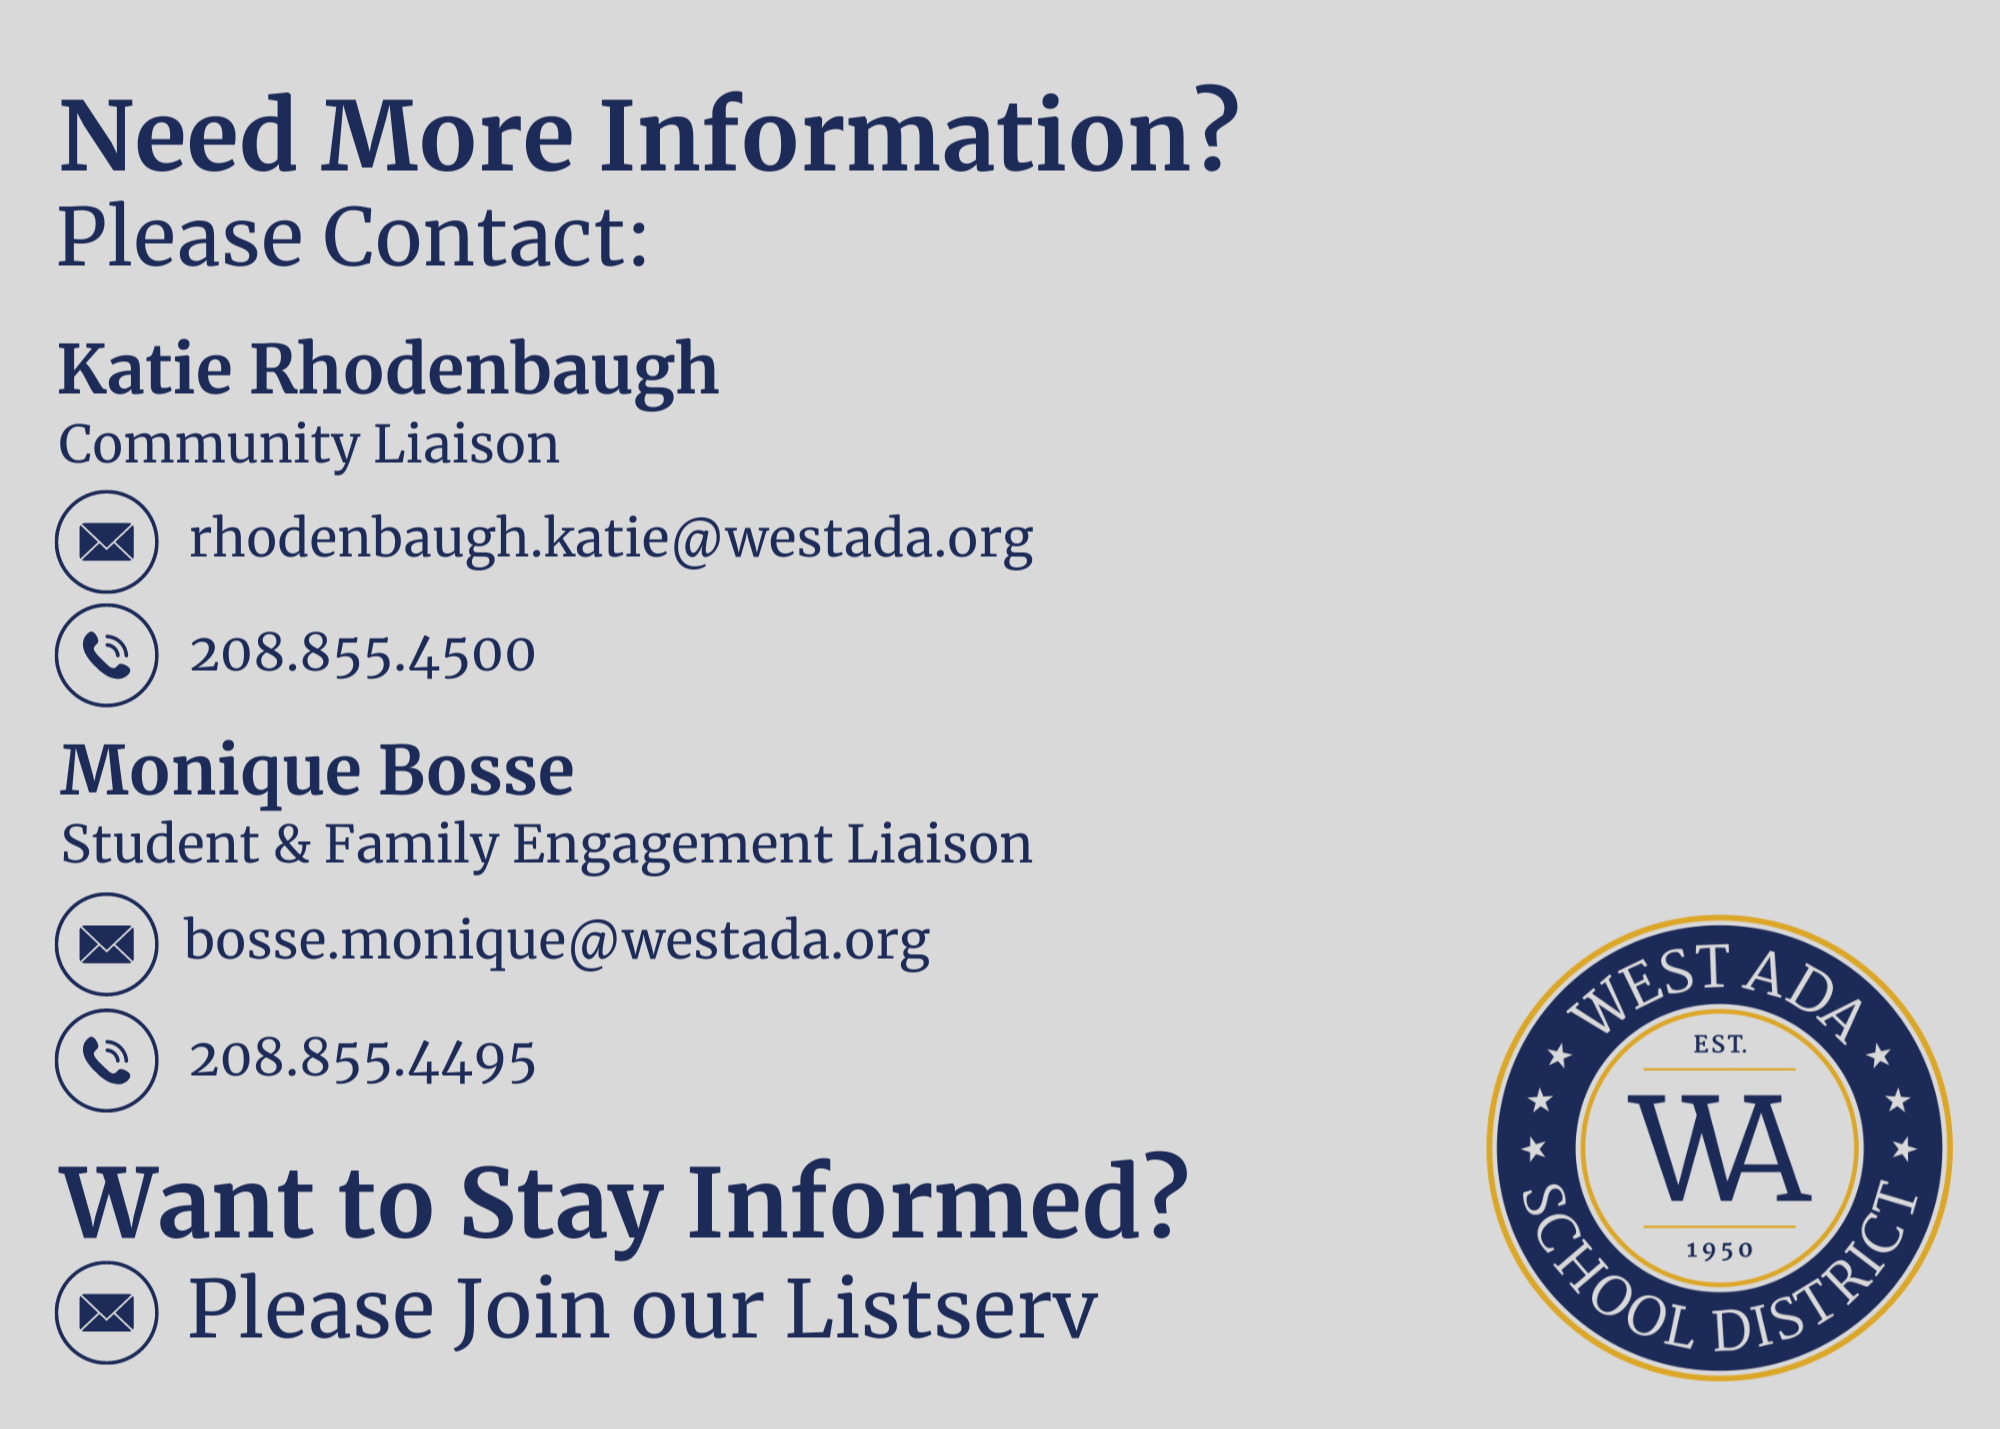 Need More Information? Please Contact: Katie Rhodenbaugh Community Liaison rhodenbaugh.katie@westada.org 208.855.4500 OR Monique Bosse Community Partners & Opportunities Manager bosse.monique@westada.org 208.855.4495 Want to Stay Informed? Please Join our Listserv.